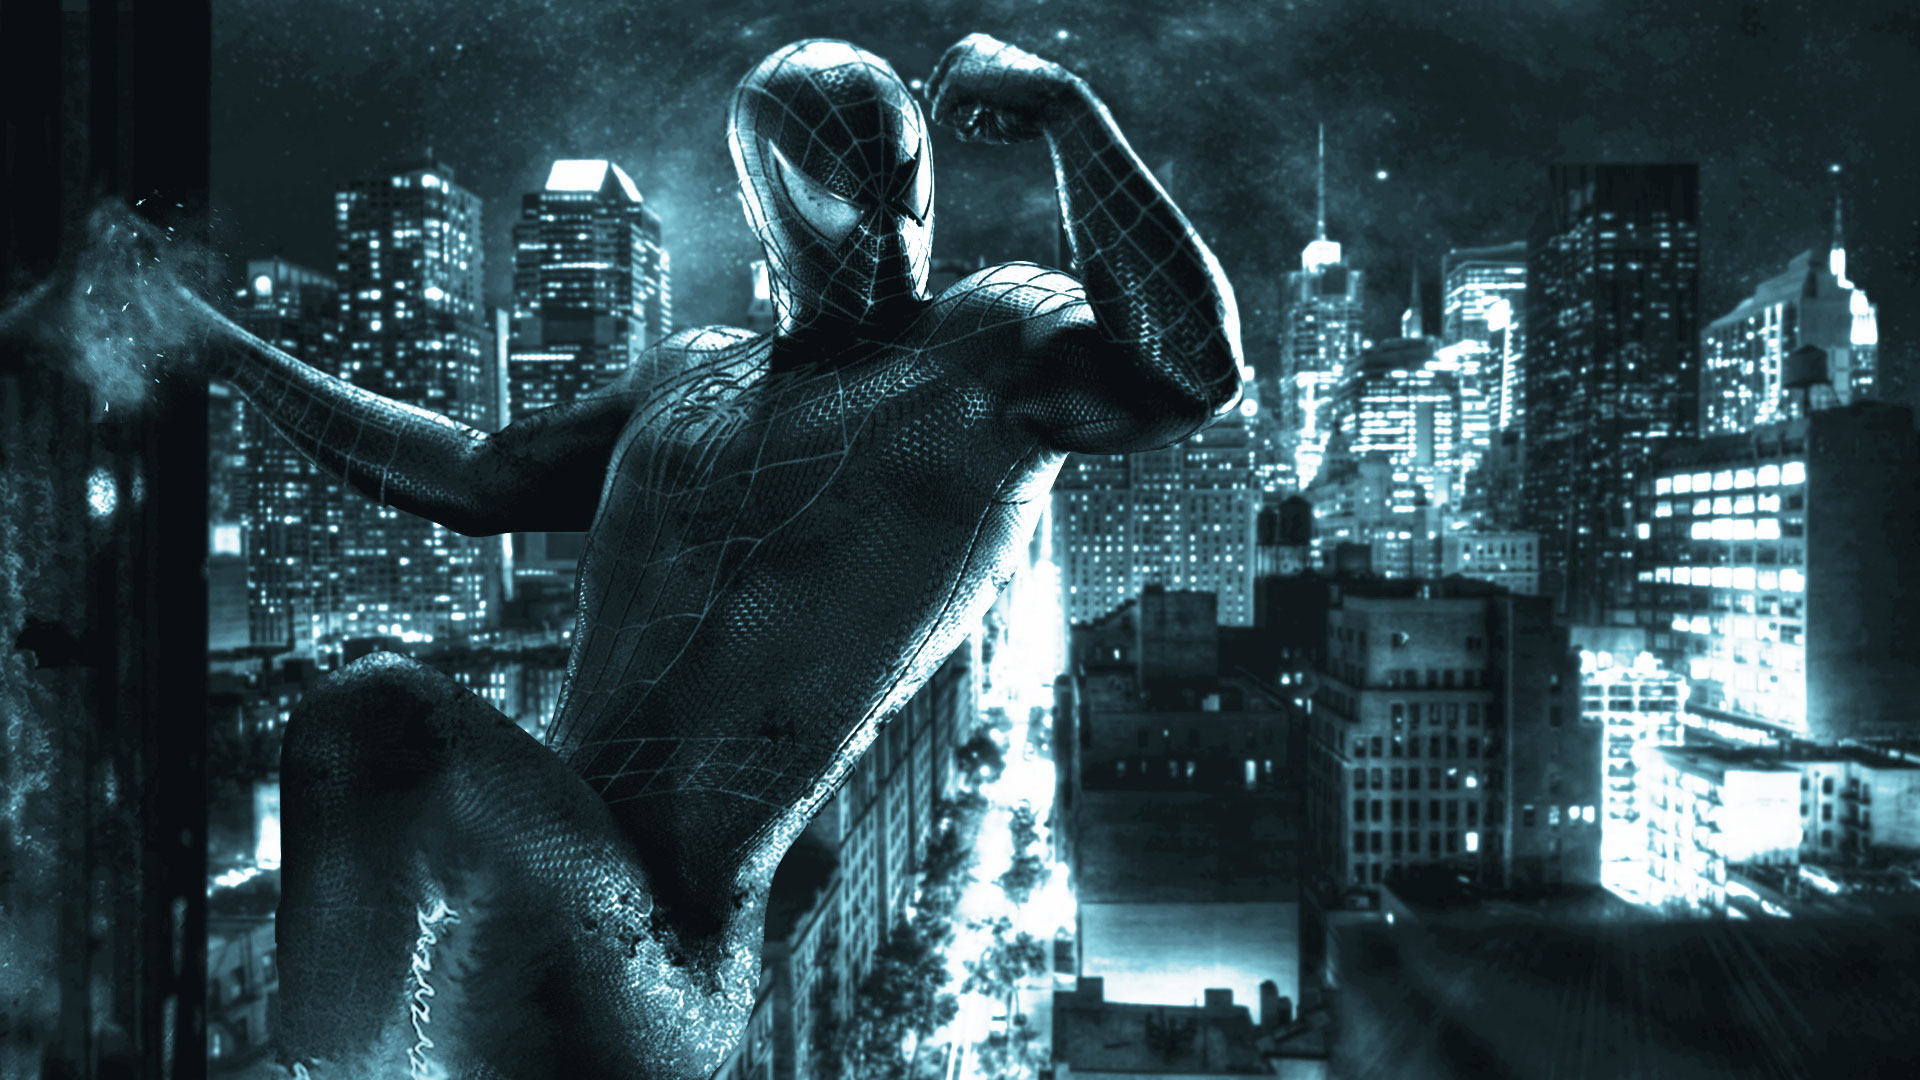 Black Spiderman Wallpaper High Quality Resolution with HD ...